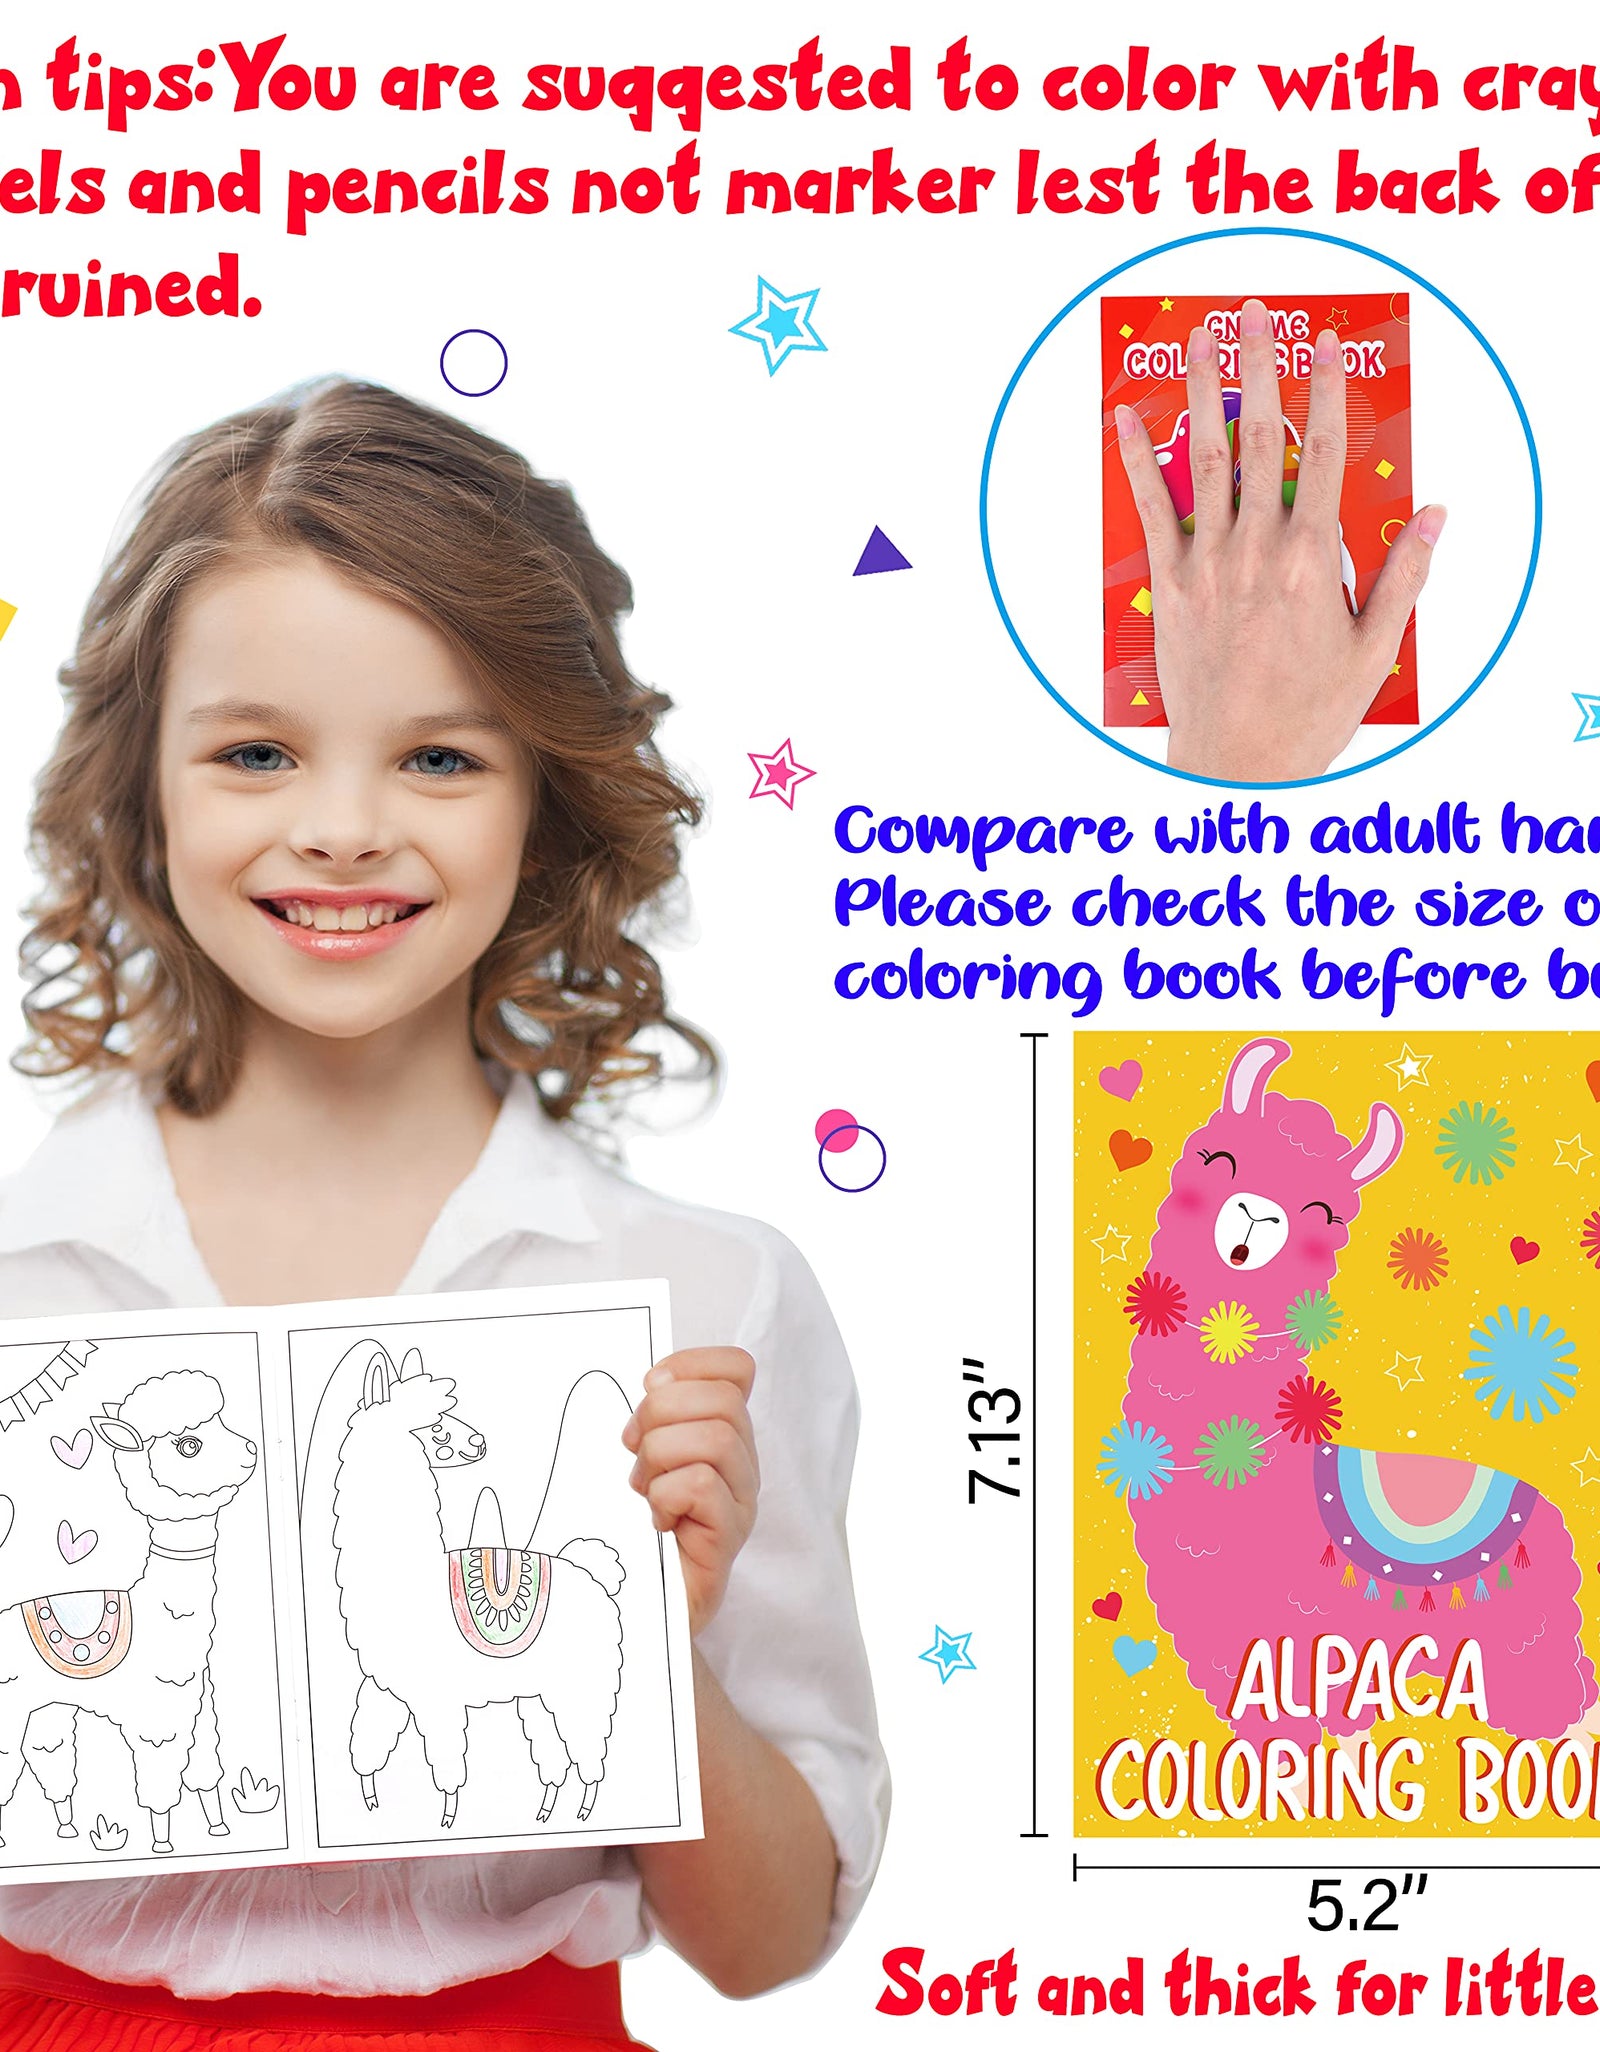 16PCS Coloring Books for Kids Ages 4-8 - Birthday Party Favors Gifts Goodie Bags Stuffer Fillers School Classroom Activity Includes Unicorn, Mermaid, Alpaca, Dinosaur, Fruits, Car,Gnome Design